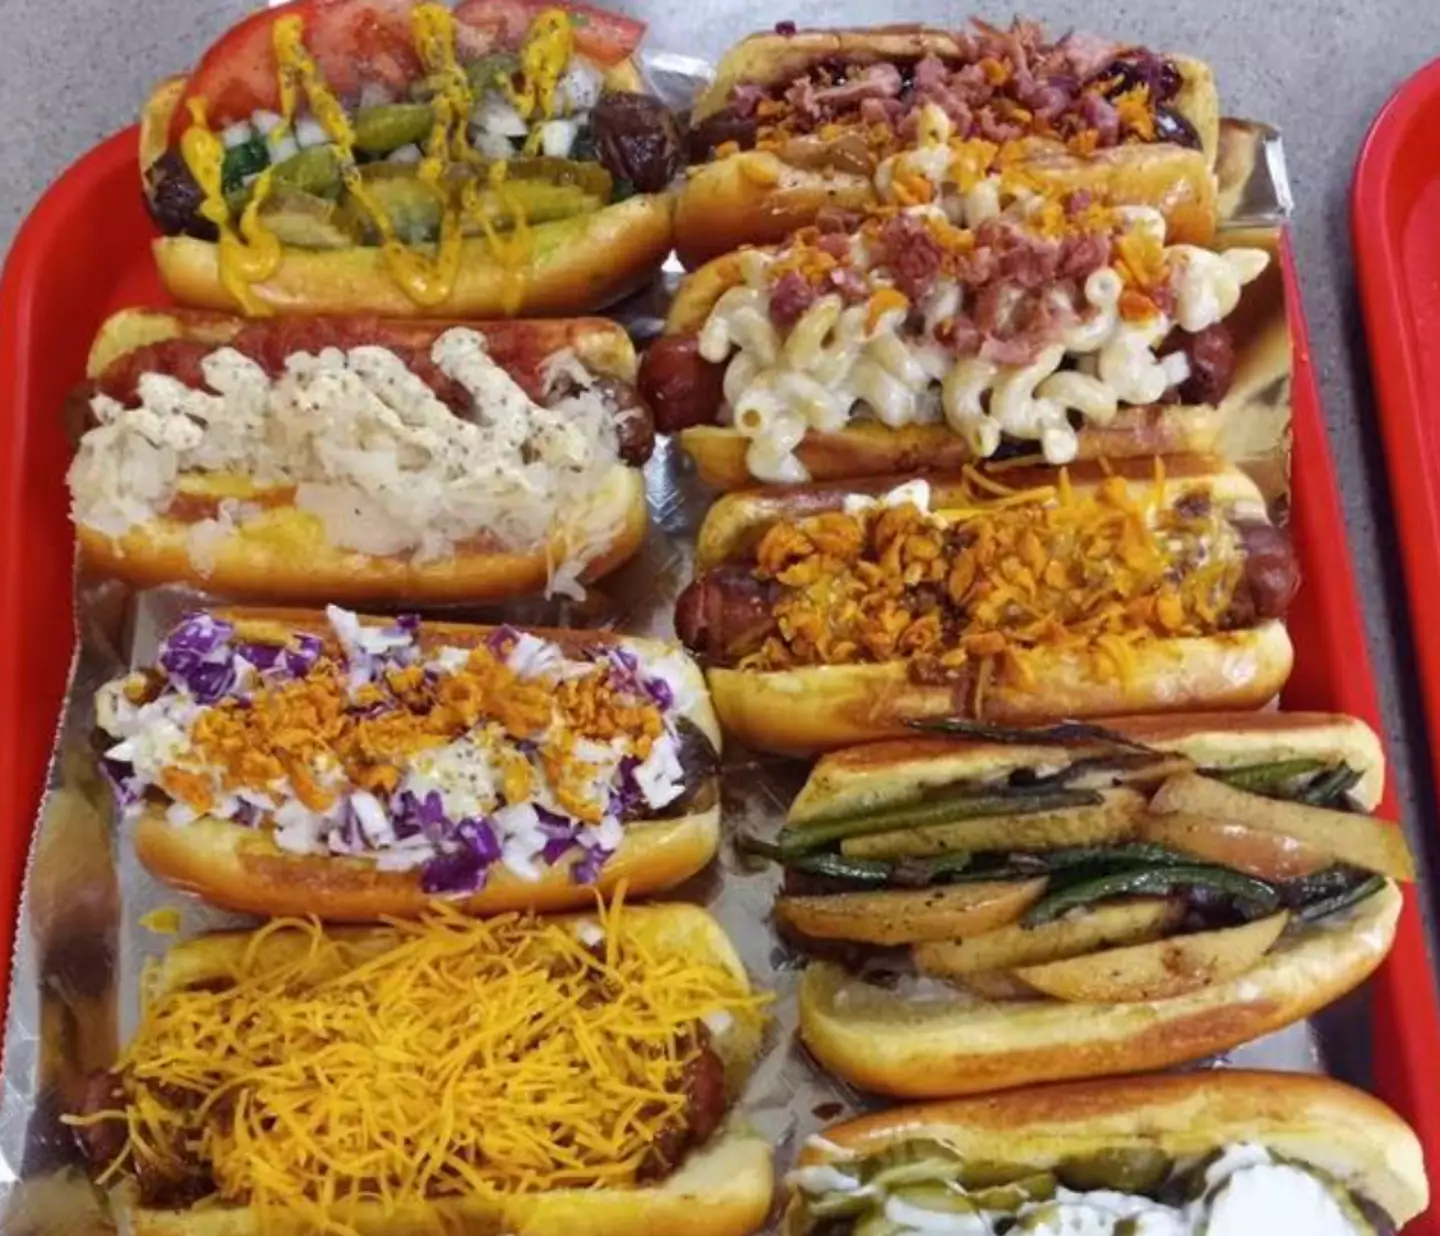 Spirals offers a range of hot dogs with different toppings.